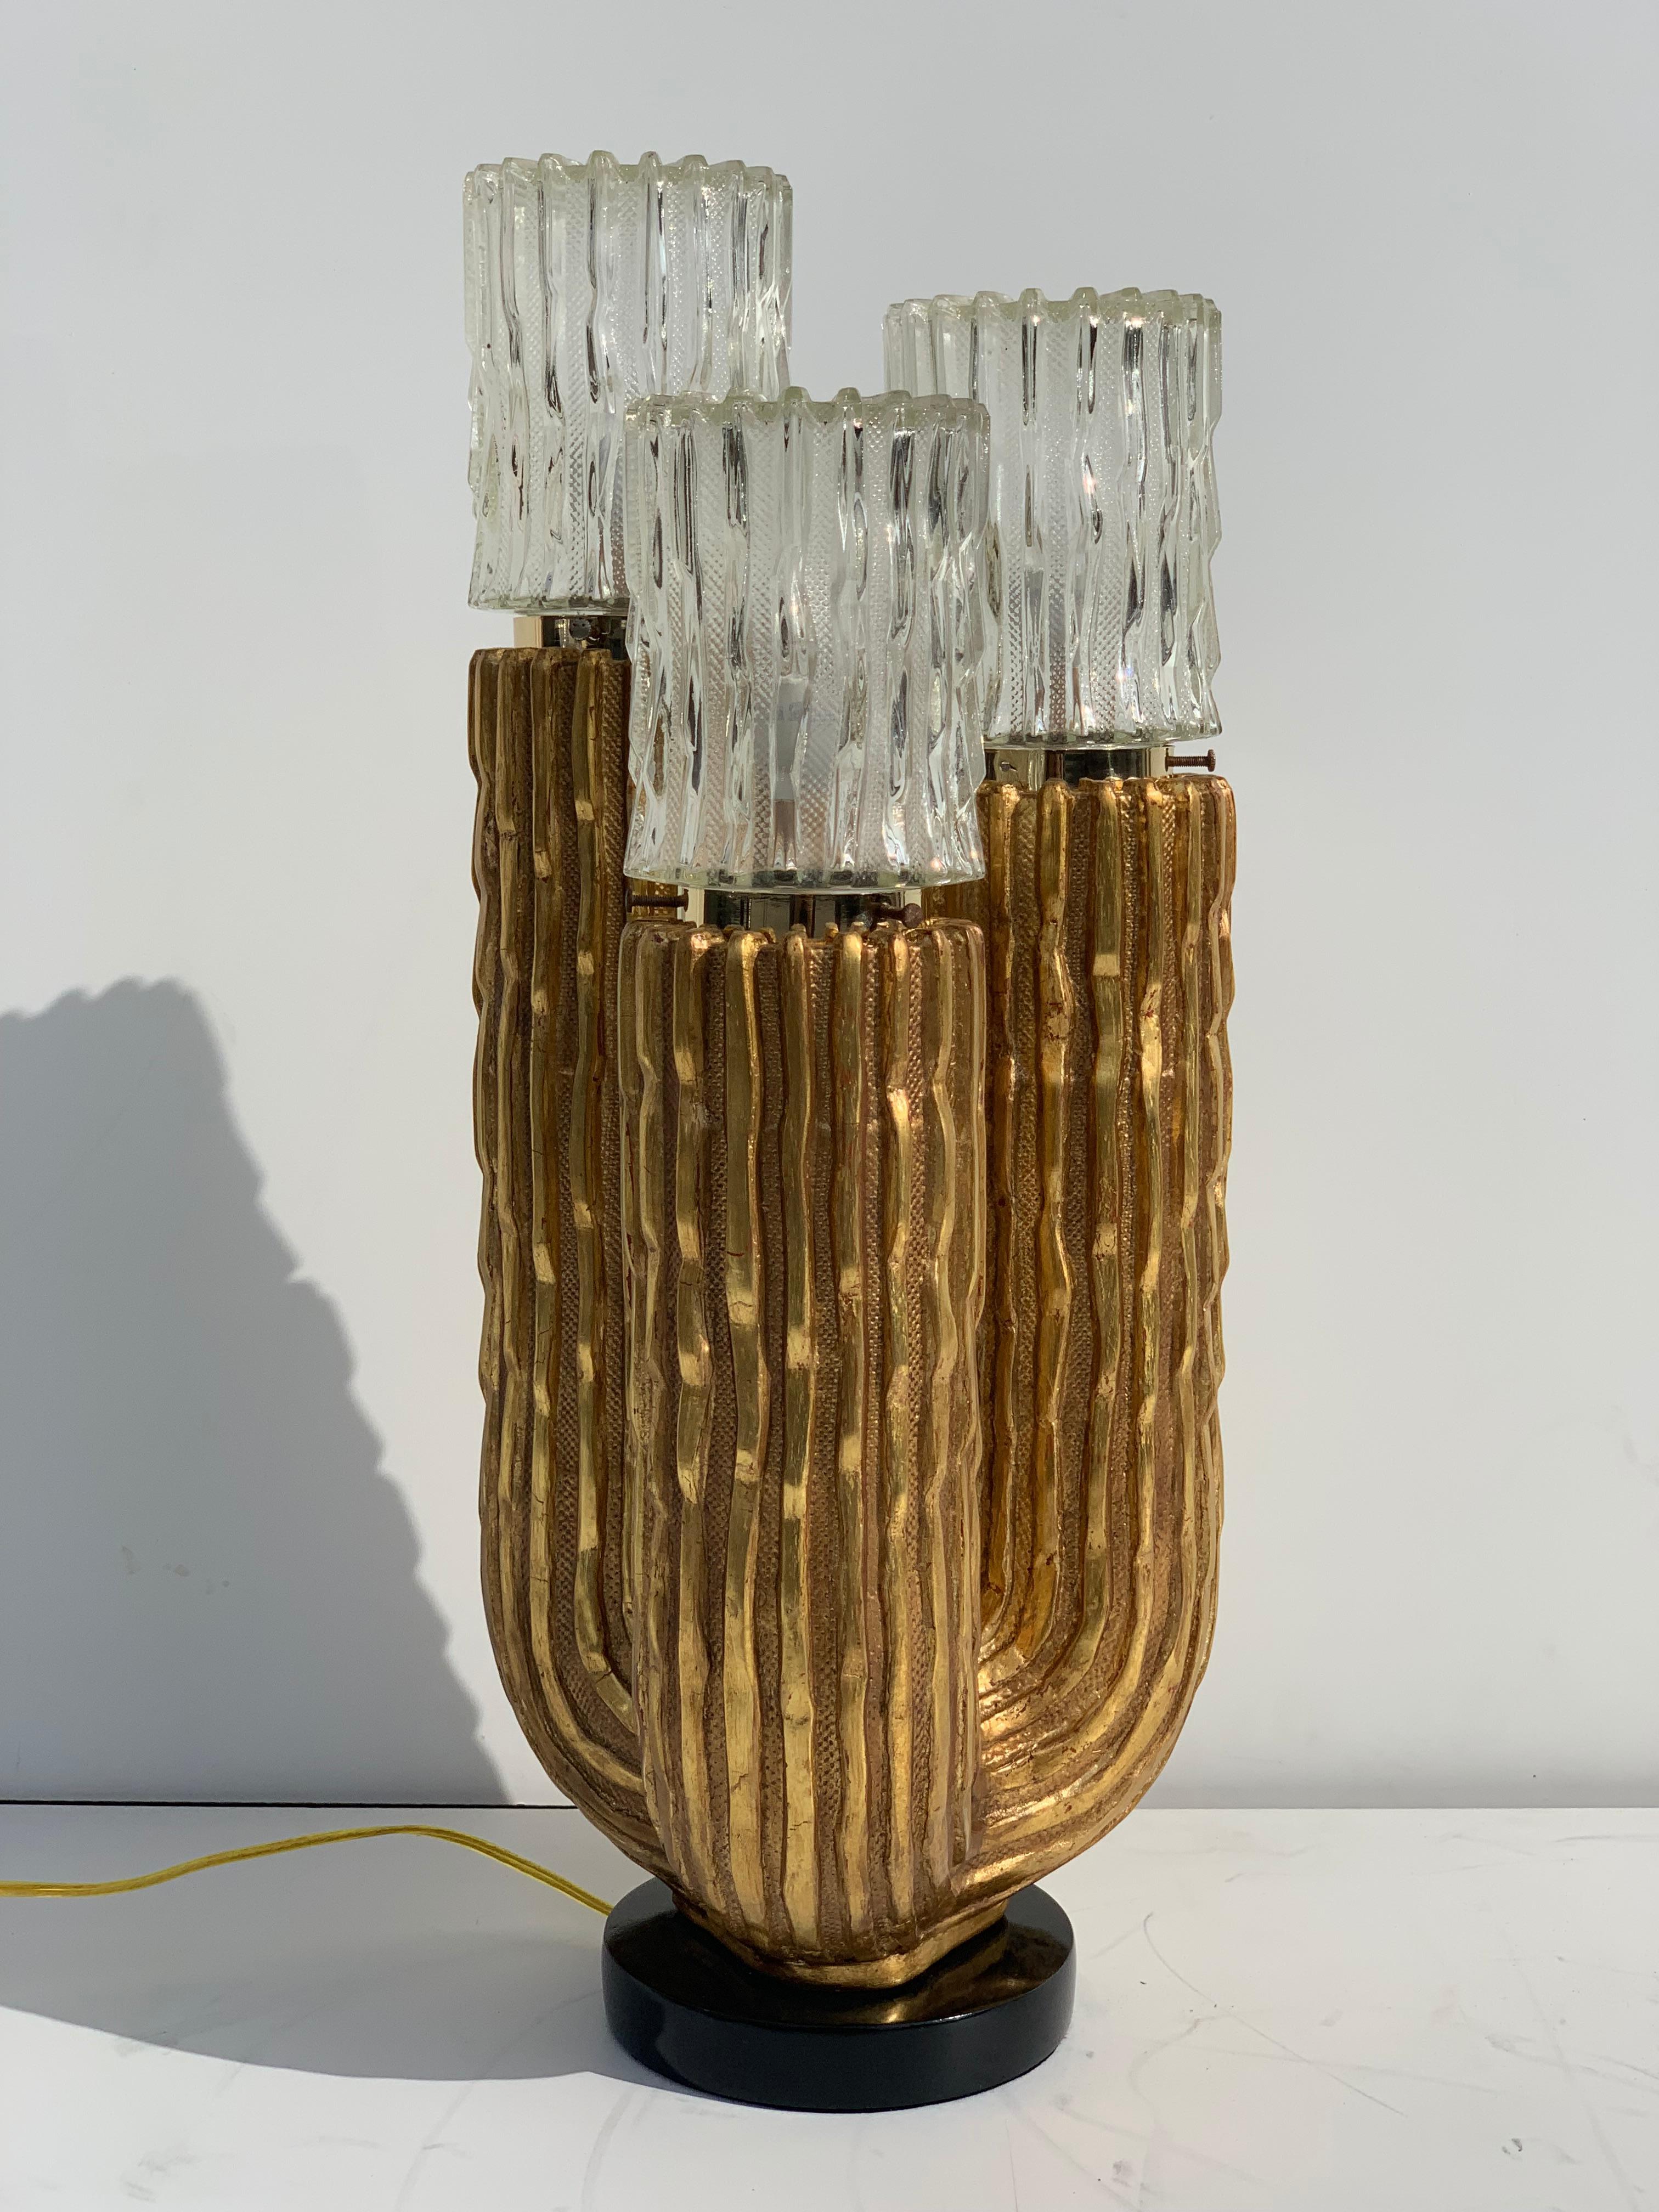 Cactus lamp in 22-karat gold leaf in the style of Alain Chervet. Requires candelabra base up to 40watt bulbs.